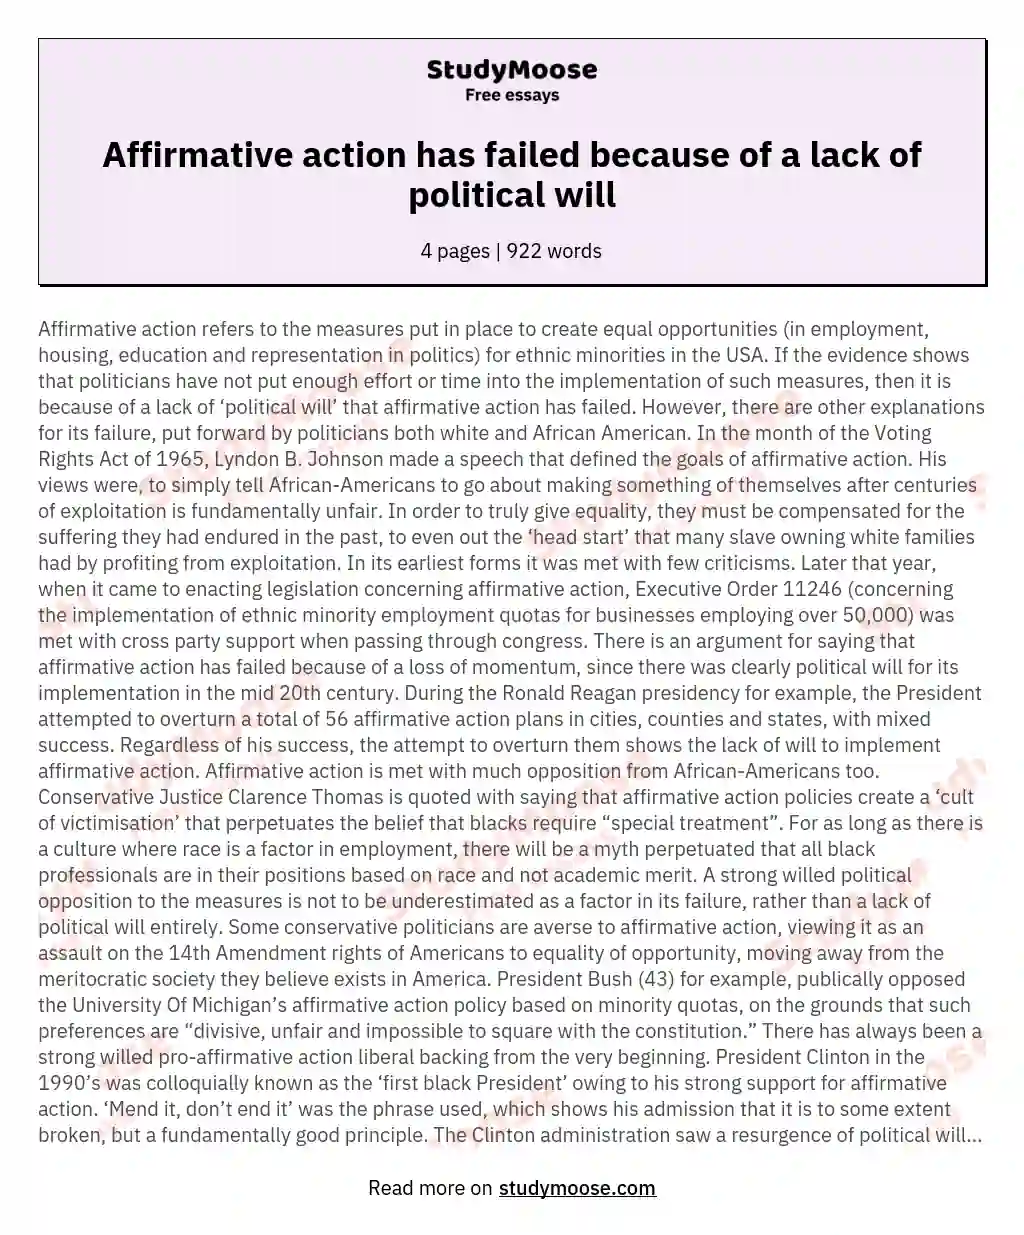 Affirmative action has failed because of a lack of political will essay